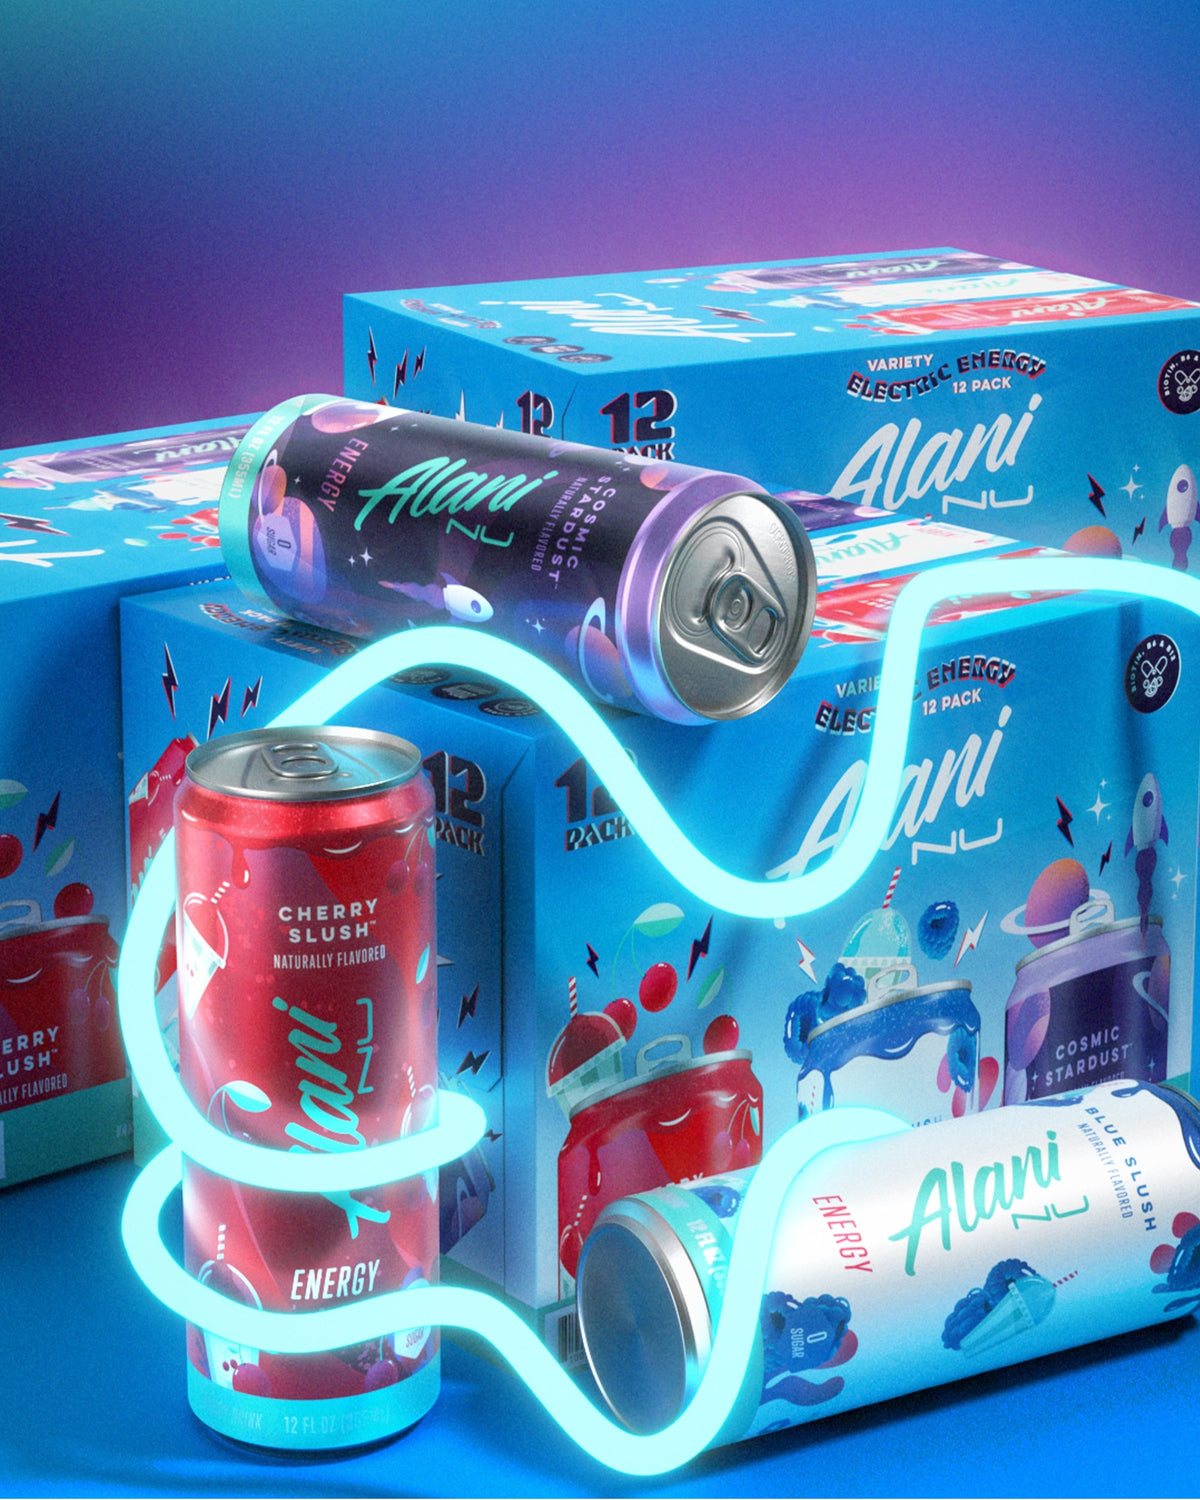 Energy drinks in Electric Energy flavors displayed next to each other by a 12pk box of Alani Nu Electric Energy.